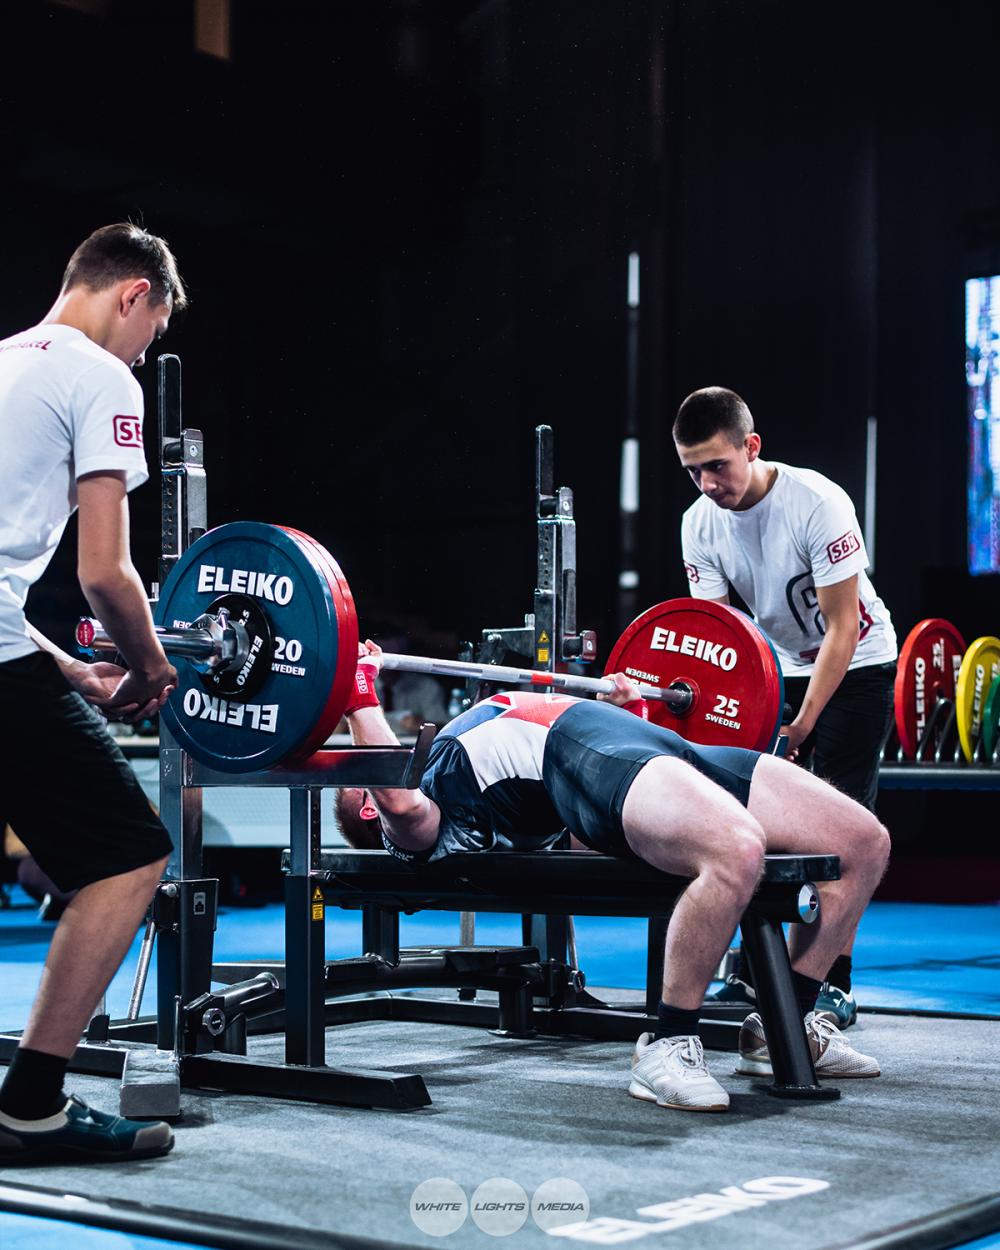 Andrew lifting 170kg in Kazahkstan at the World Bench Press Championships